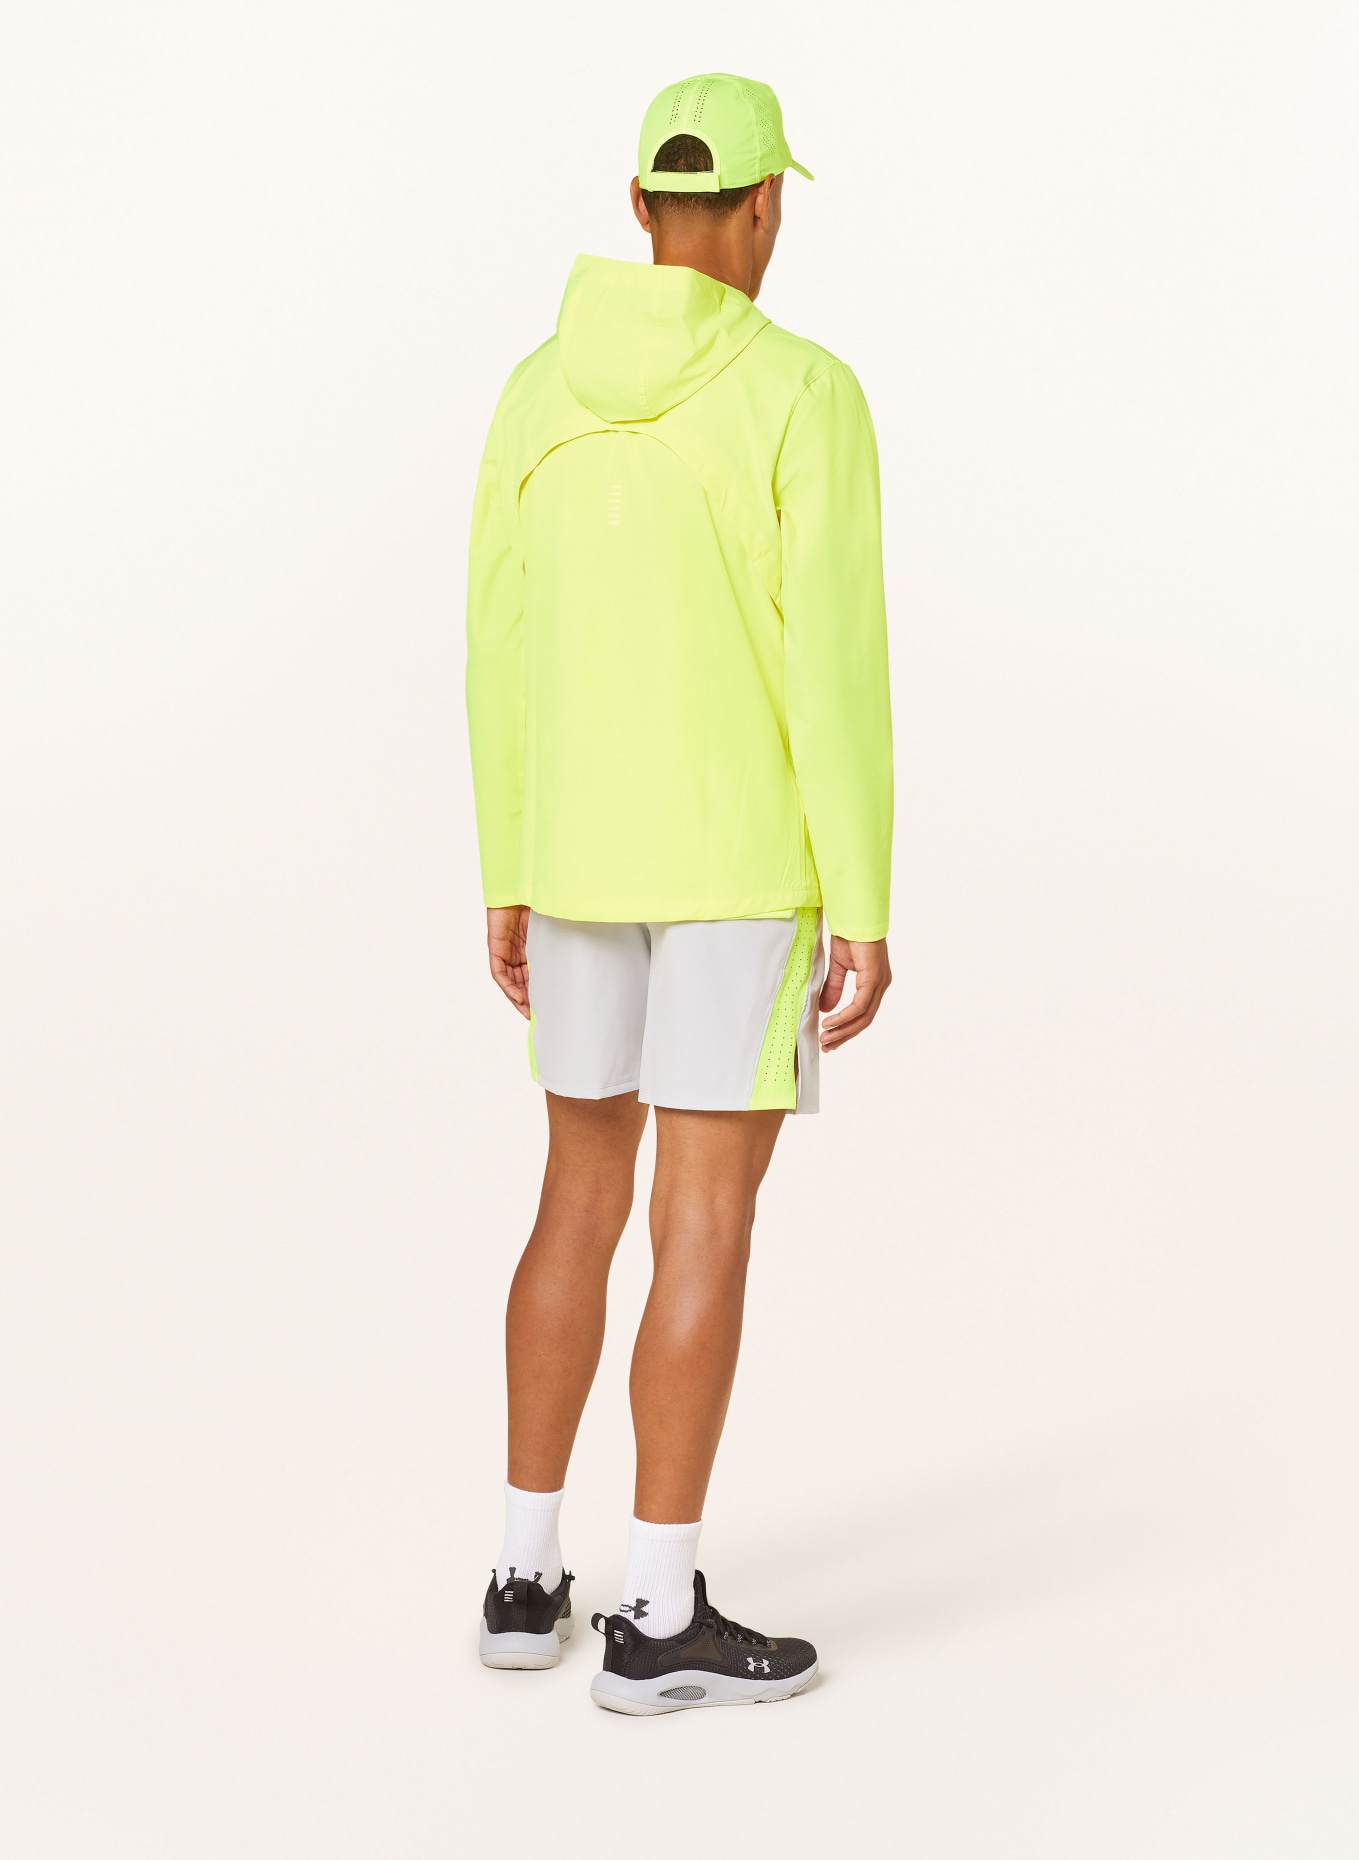 UNDER ARMOUR Running jacket OUTRUN THE STORM, Color: NEON YELLOW (Image 3)